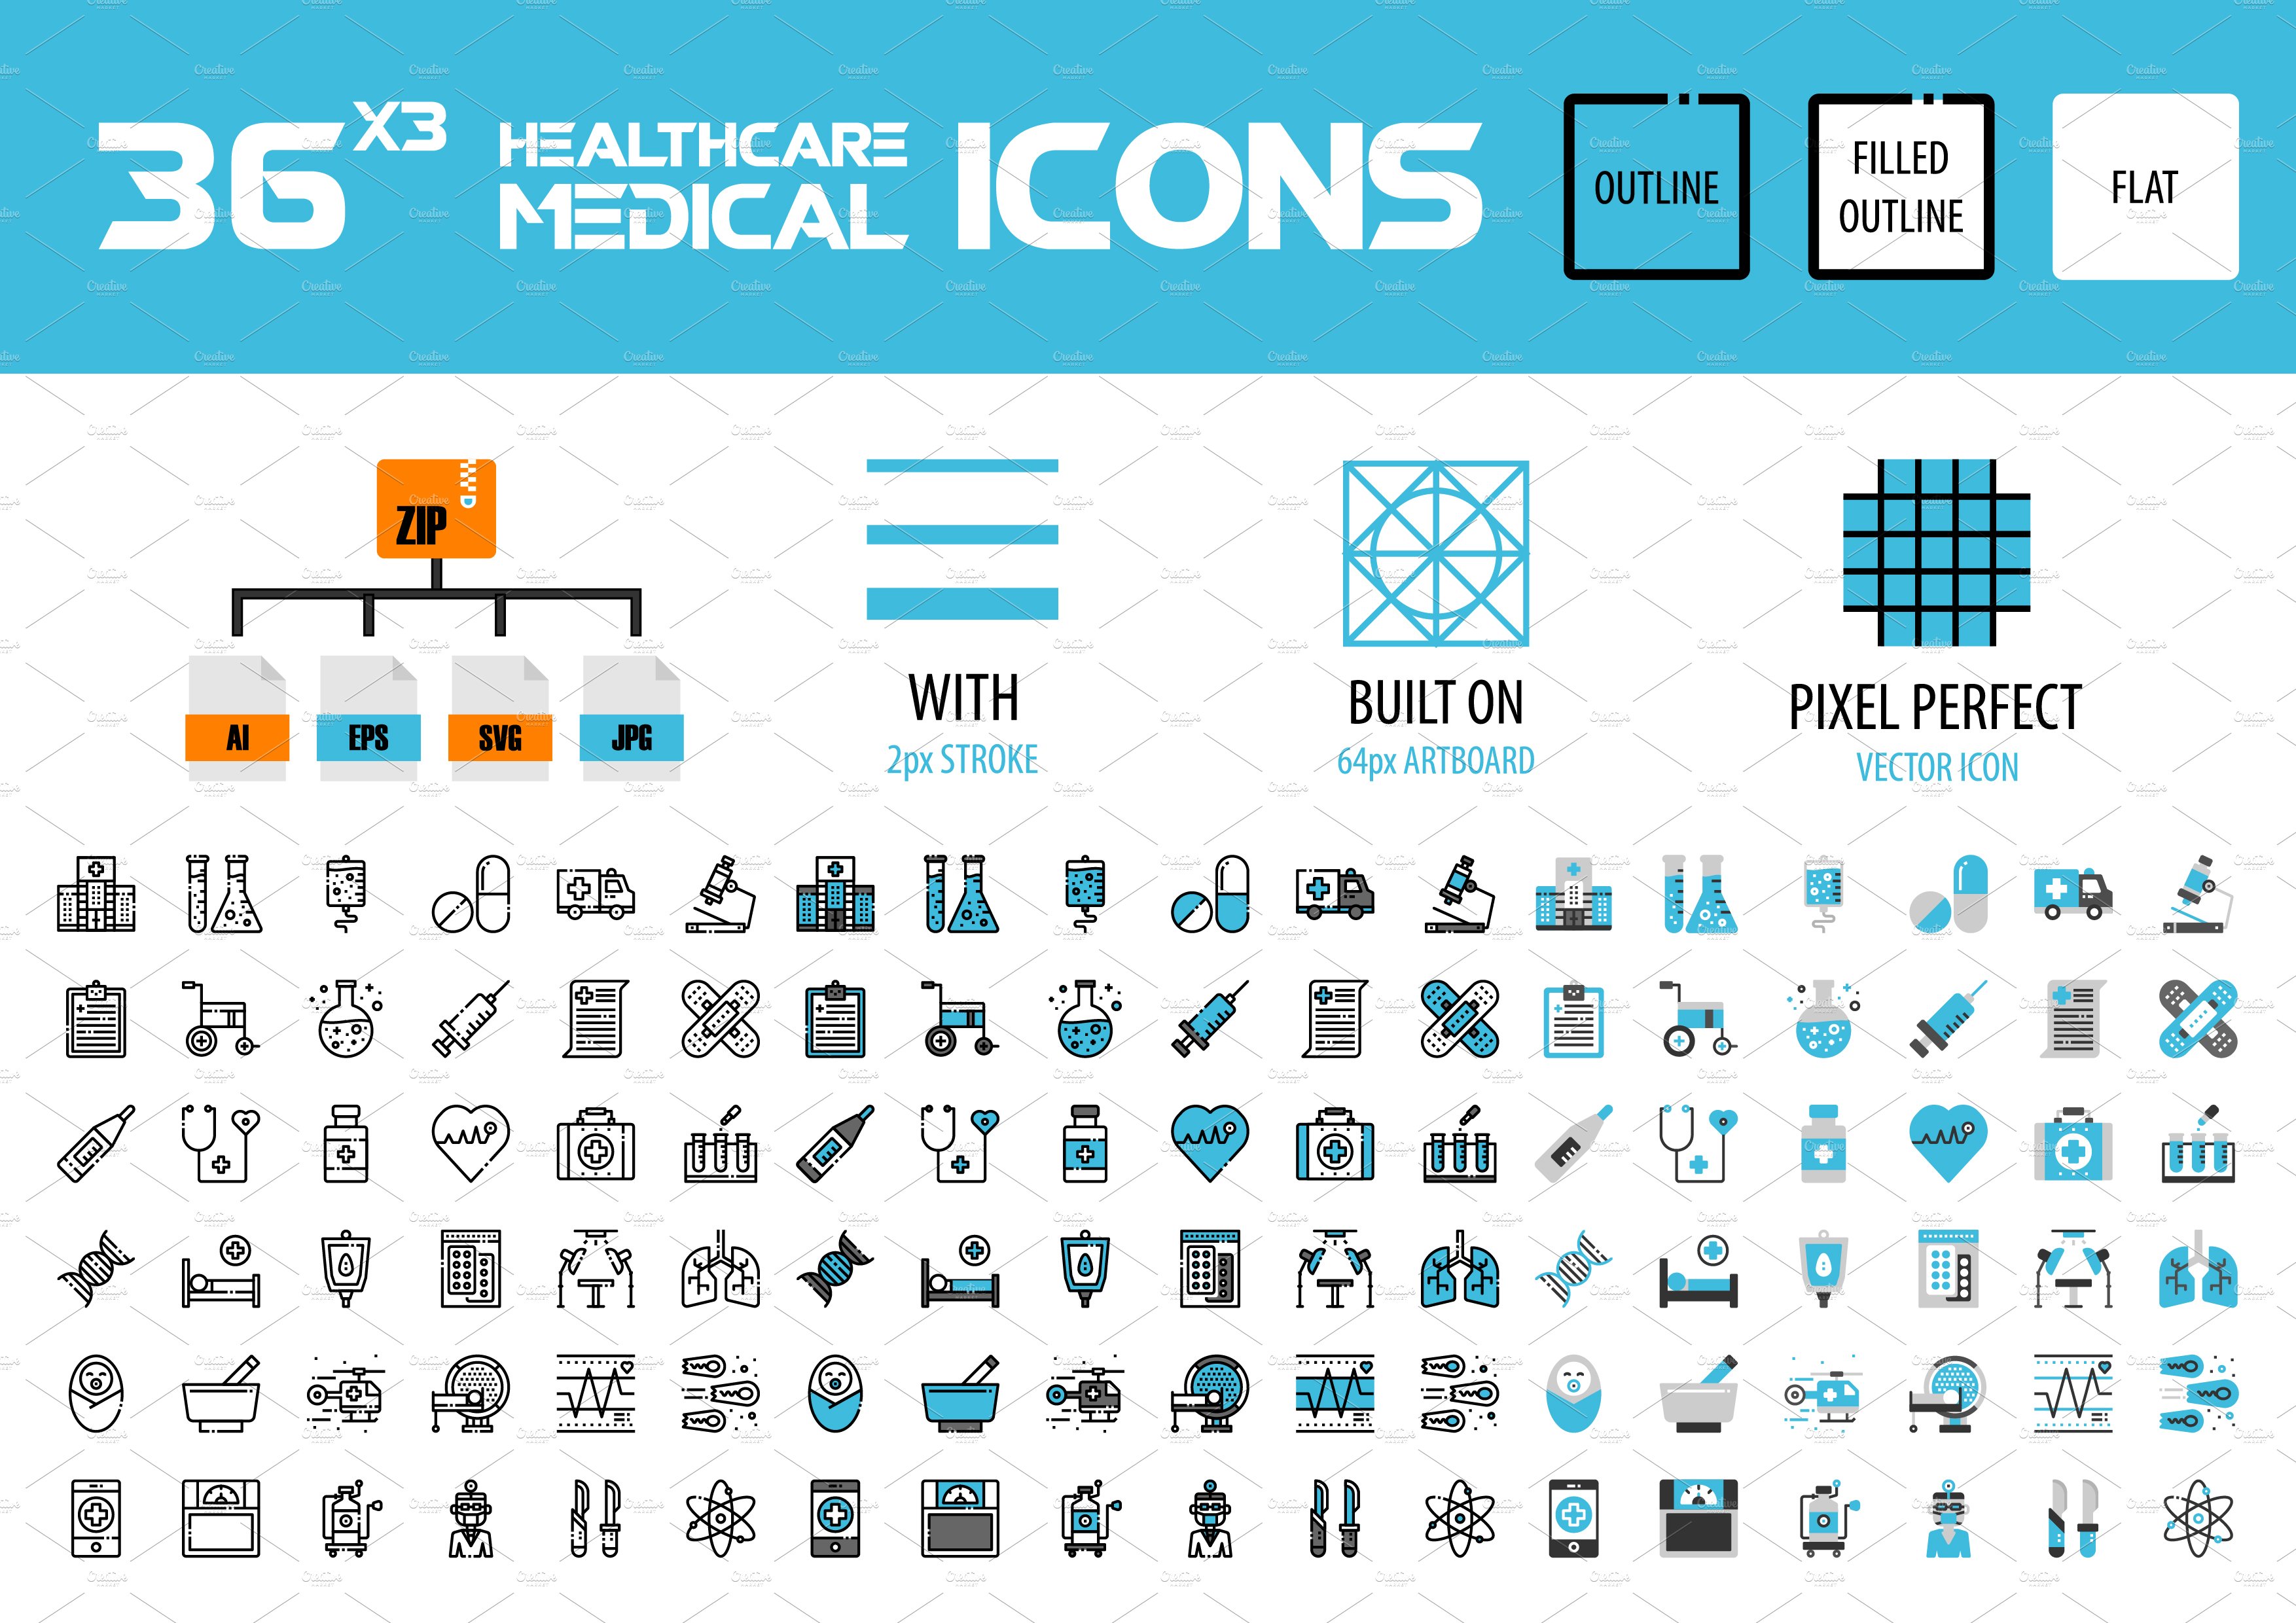 36x3 Healthcare & Medical icons preview image.